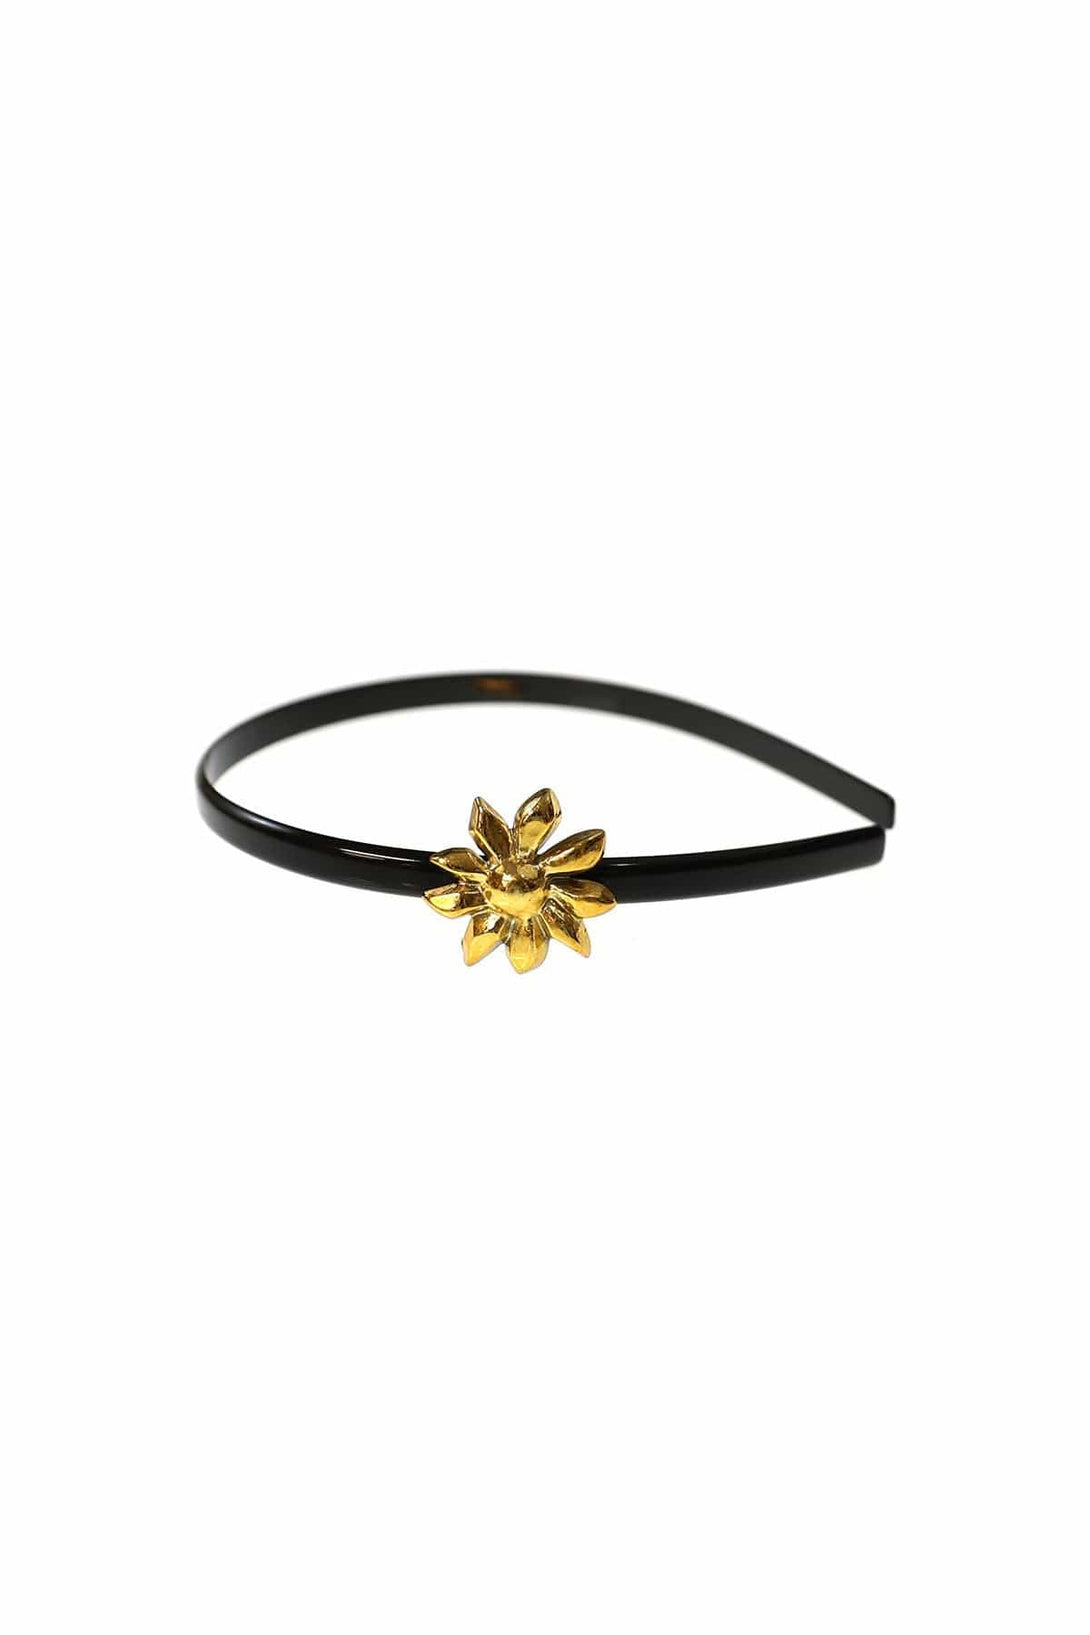 Vintage French Hair Headband with Gold Flower